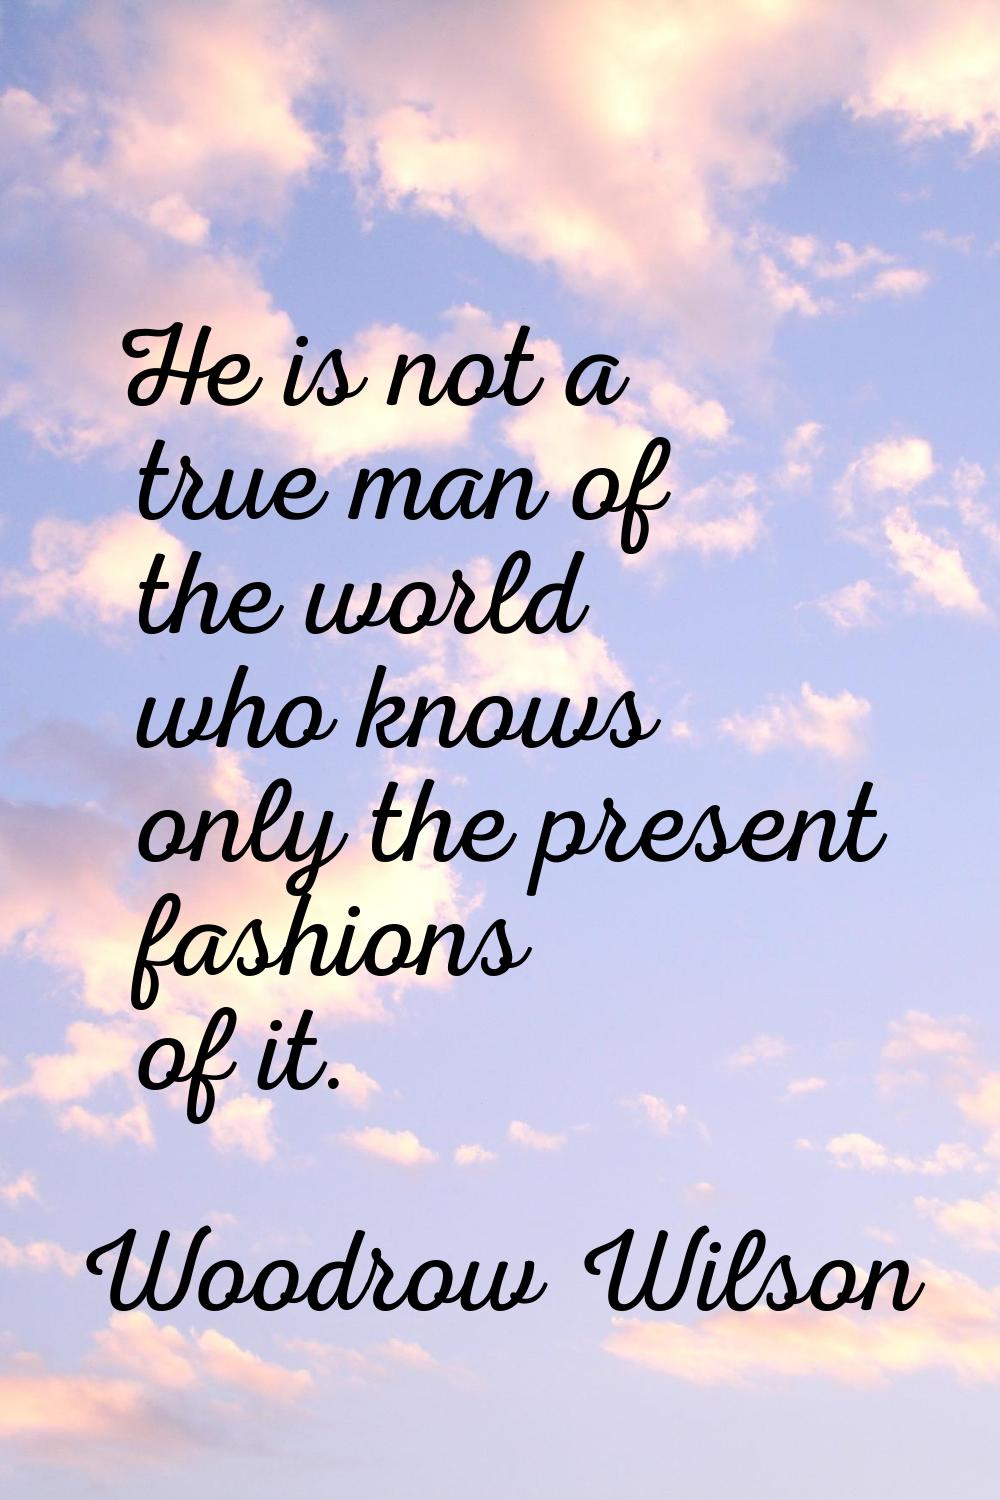 He is not a true man of the world who knows only the present fashions of it.